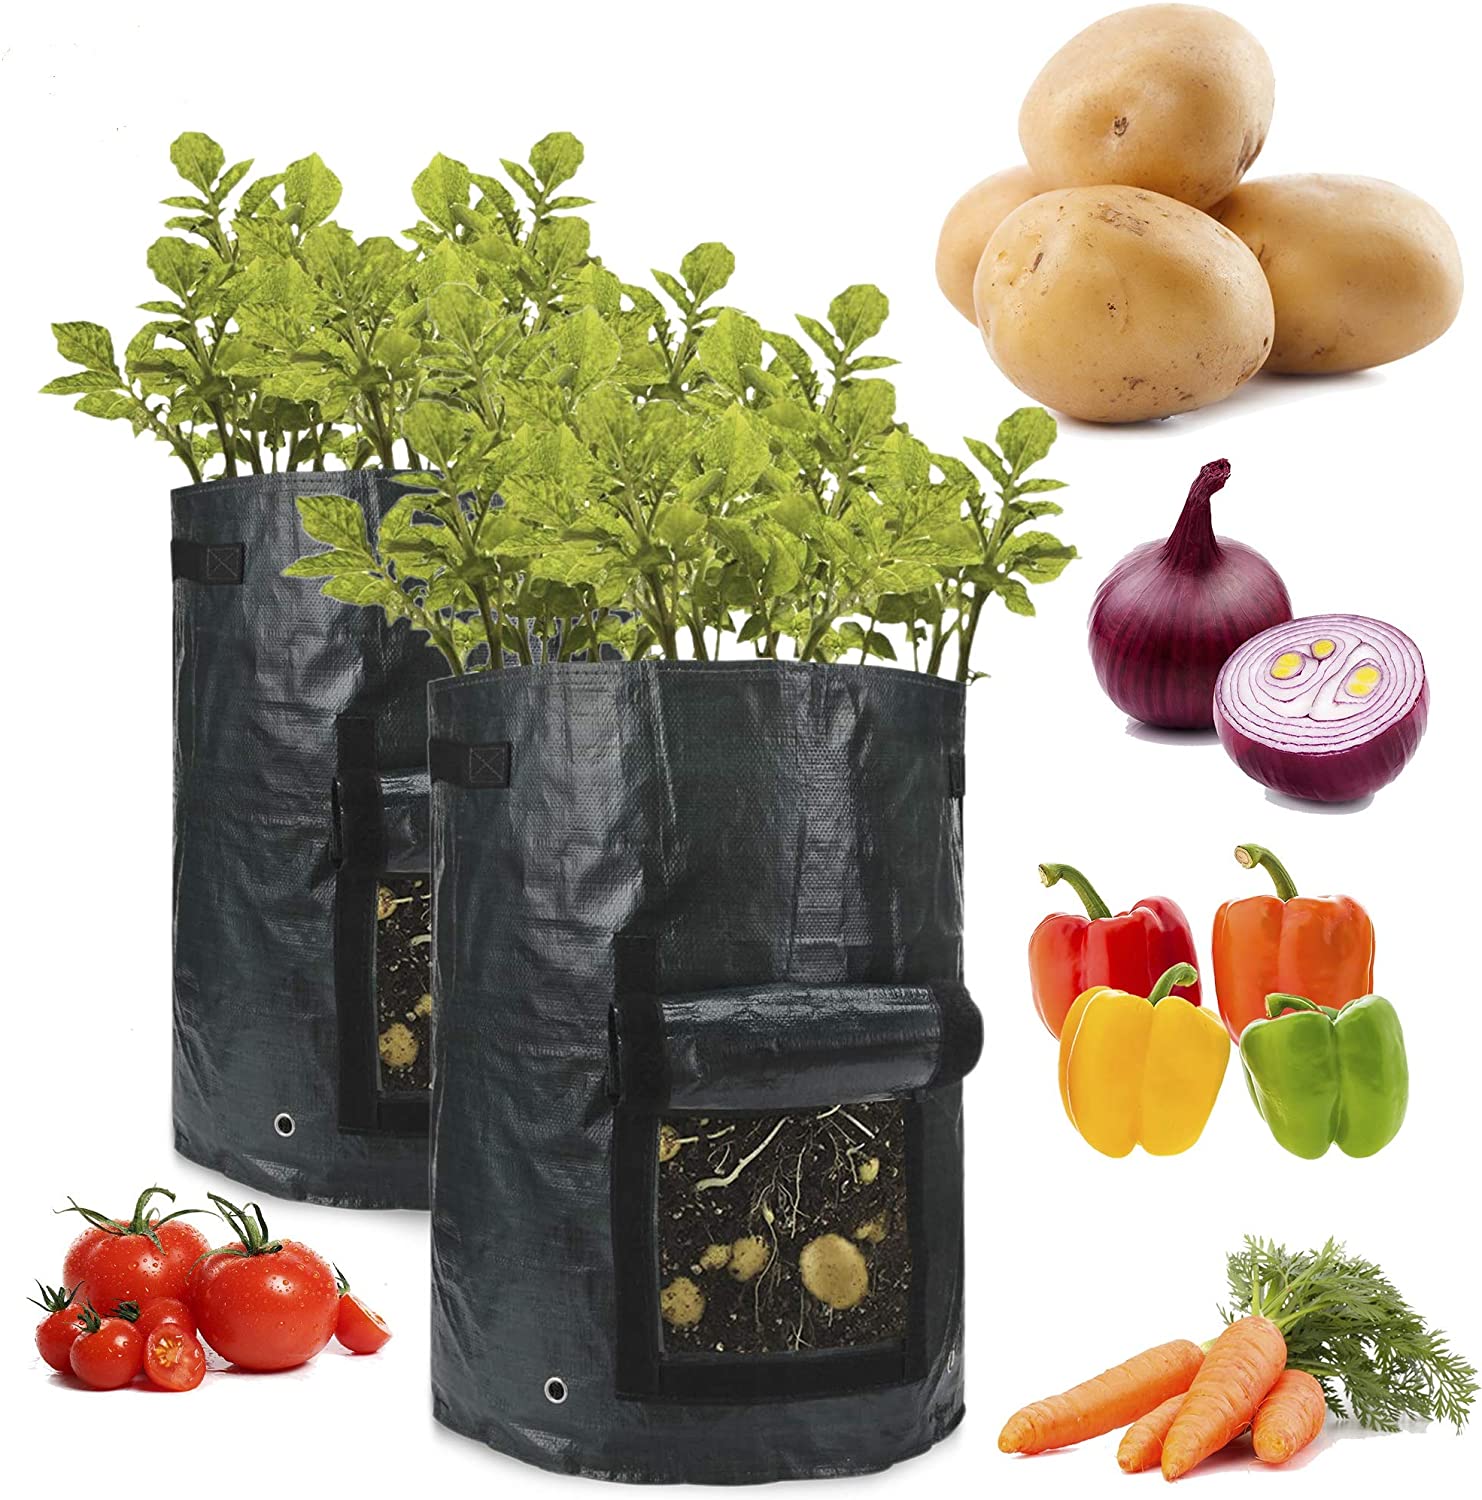 These 10 gallons potato bags are equally good for indoor planting and outdoor planting; including courtyards, balconies, gardens and other space. It can be used to grow multiple vegetables